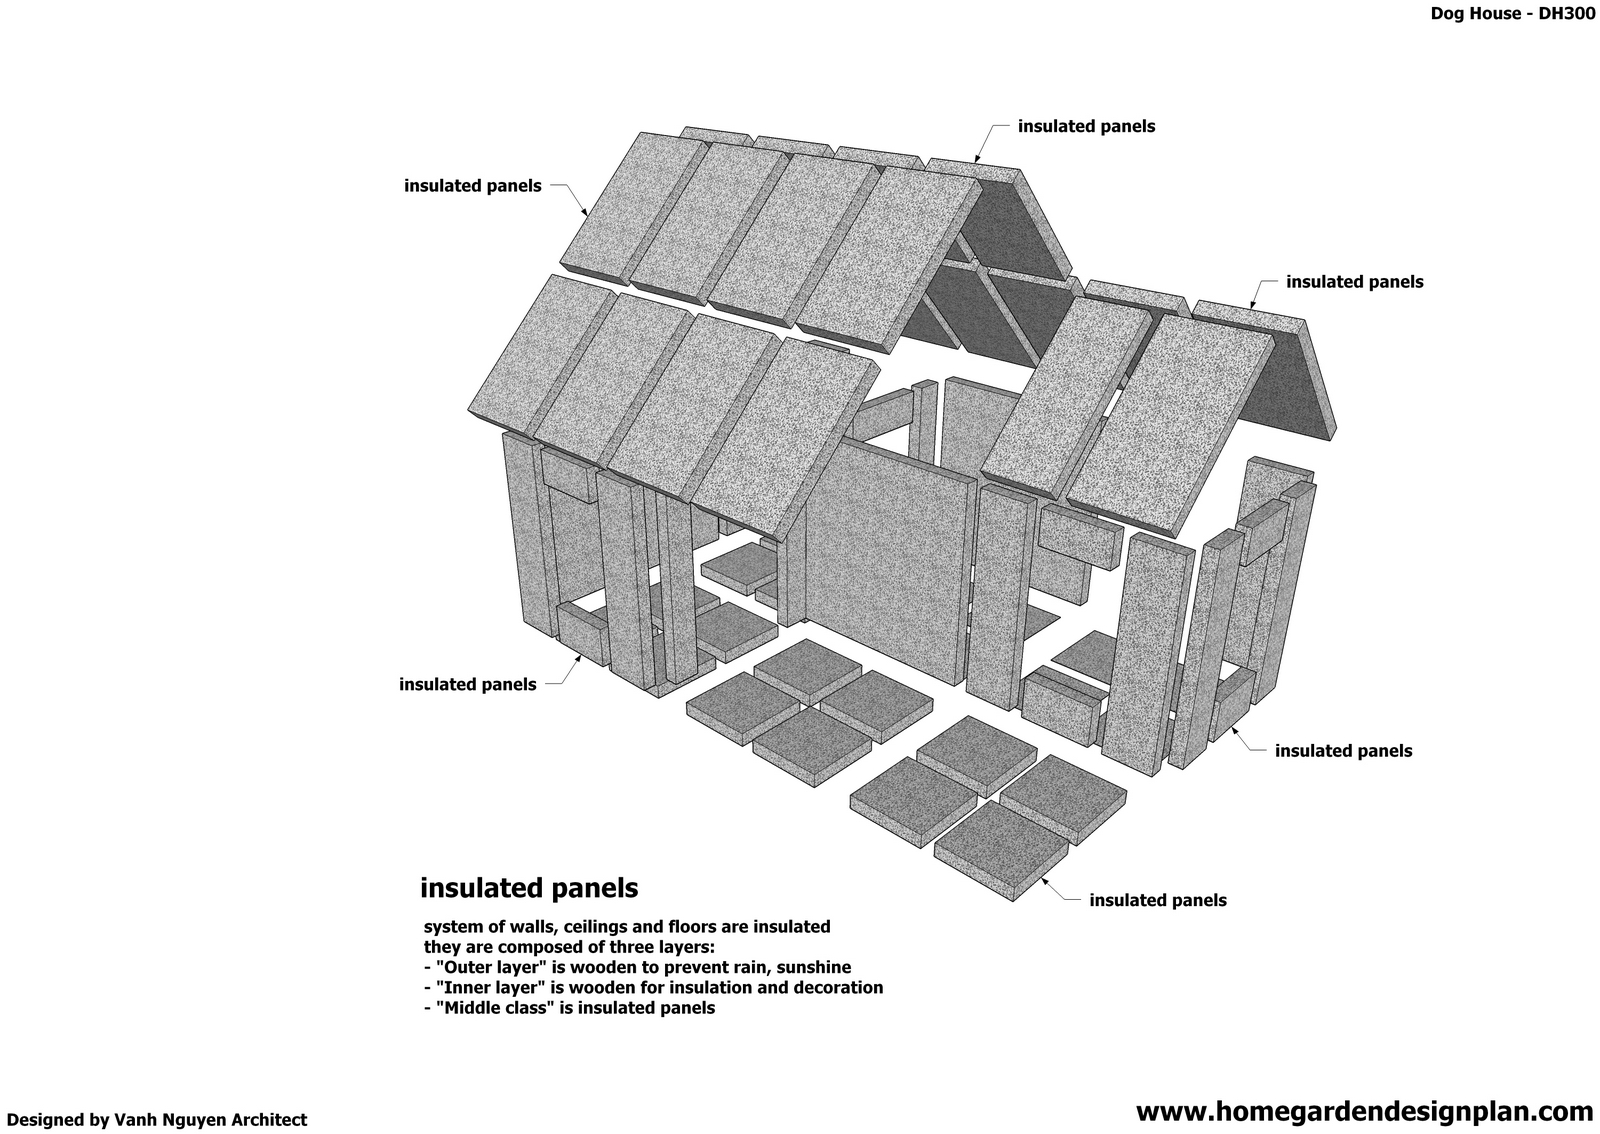 home garden plans: dh300 - dog house plans free - how to